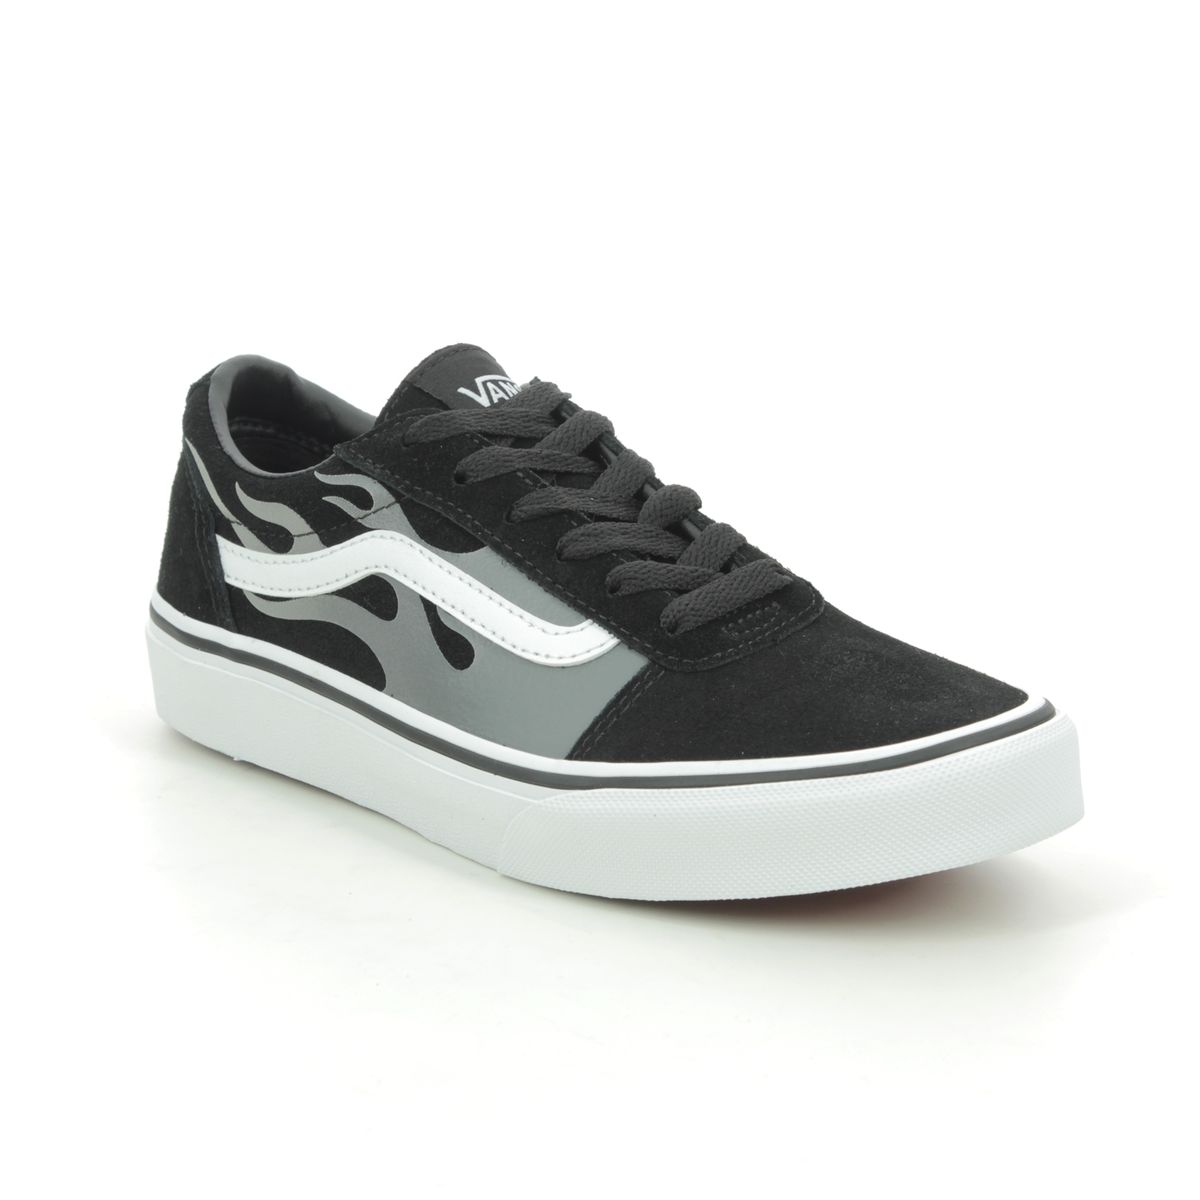 Vans Ward Flame Black grey Kids Boys Trainers VN0A38J93-RV1 in a Plain Leather in Size 2